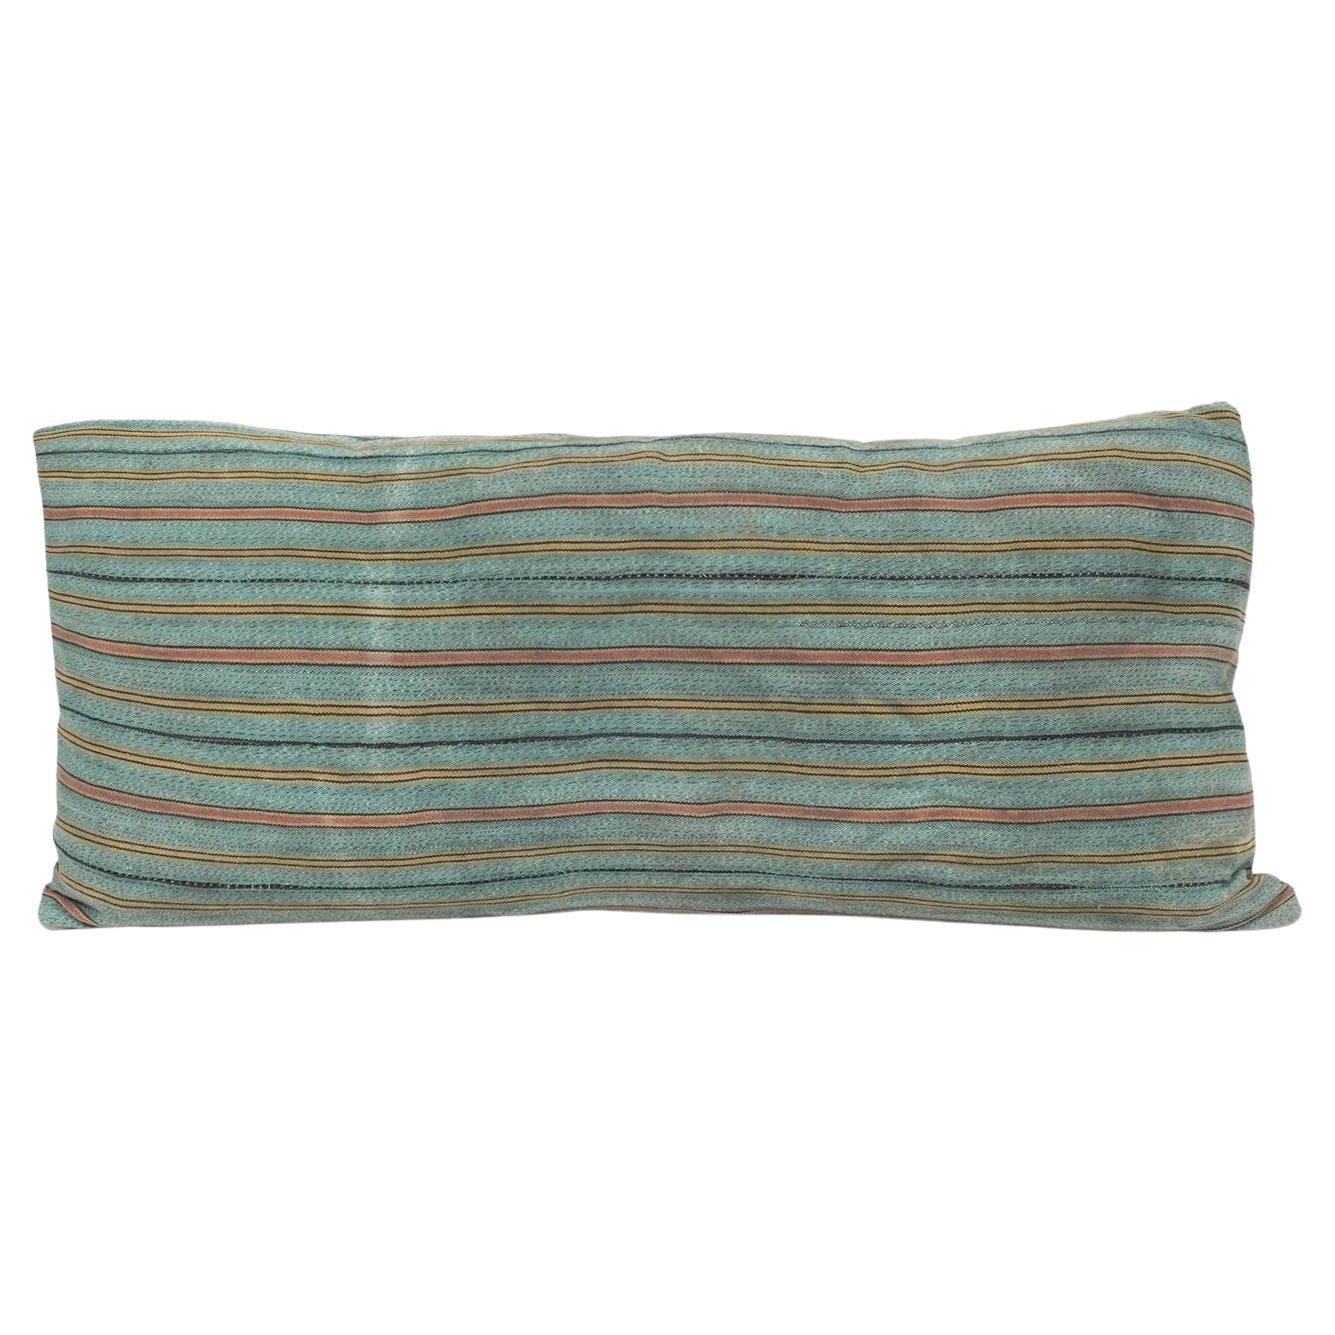 Large Teal, Gold, Navy and Coral Striped Lumbar Cushion